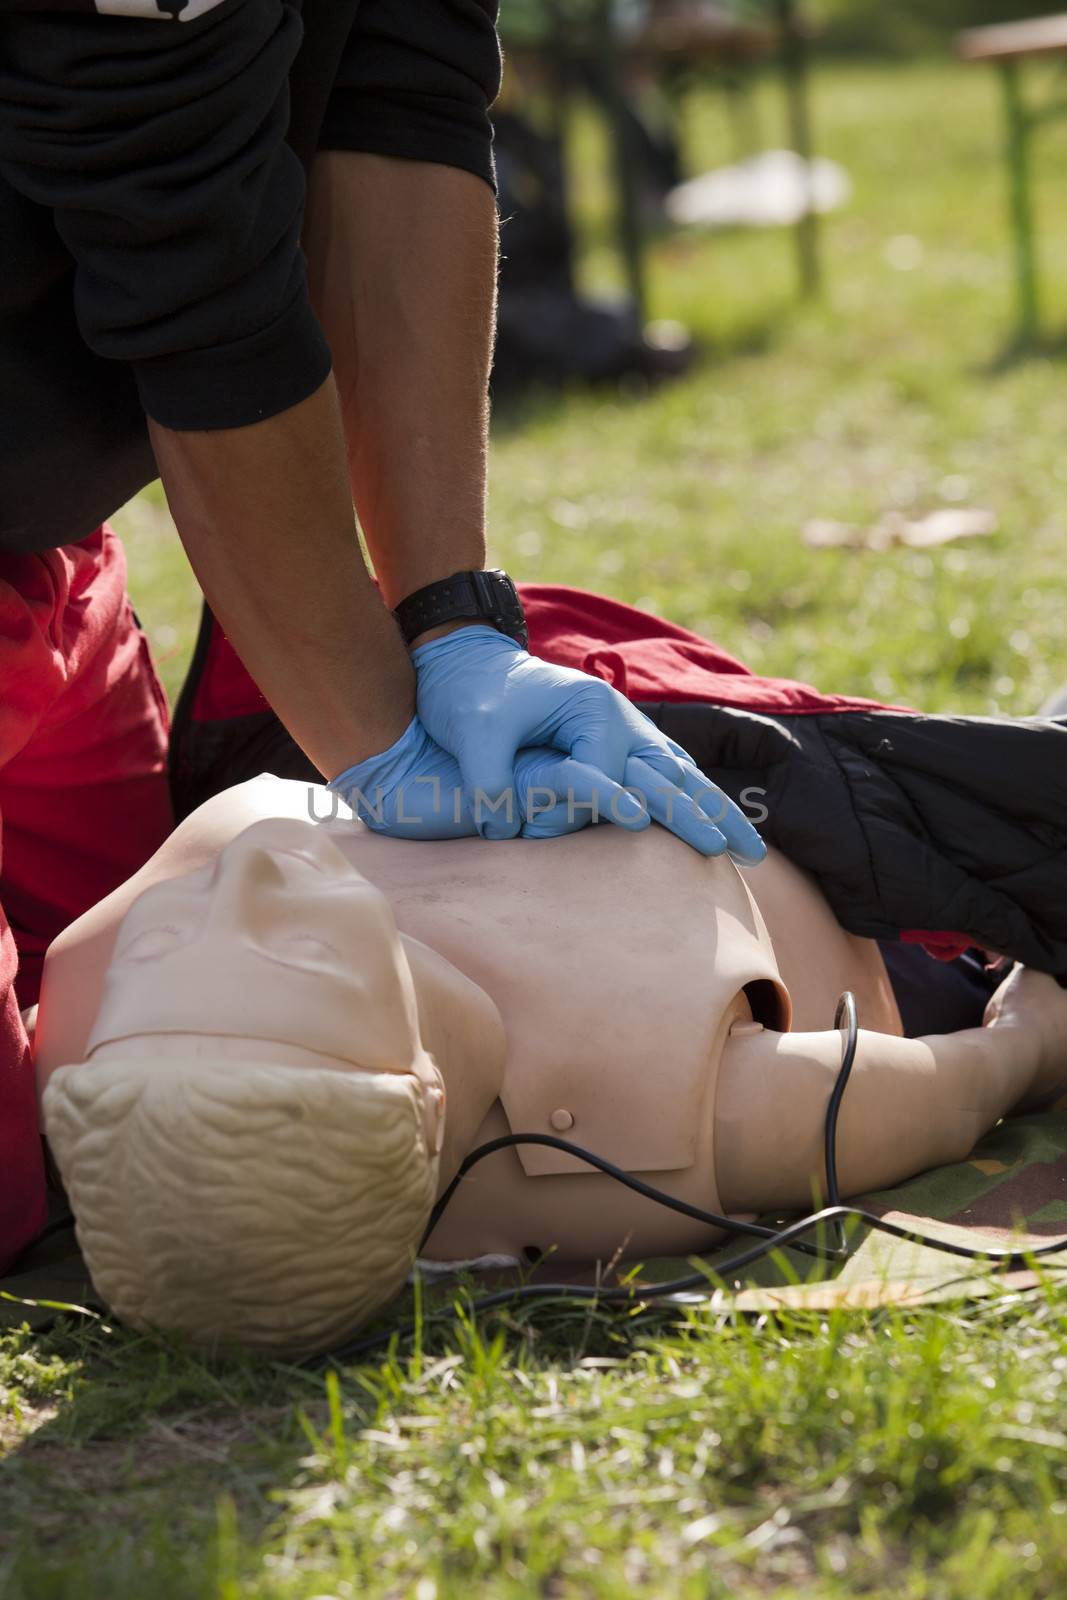 CPR practice by wellphoto